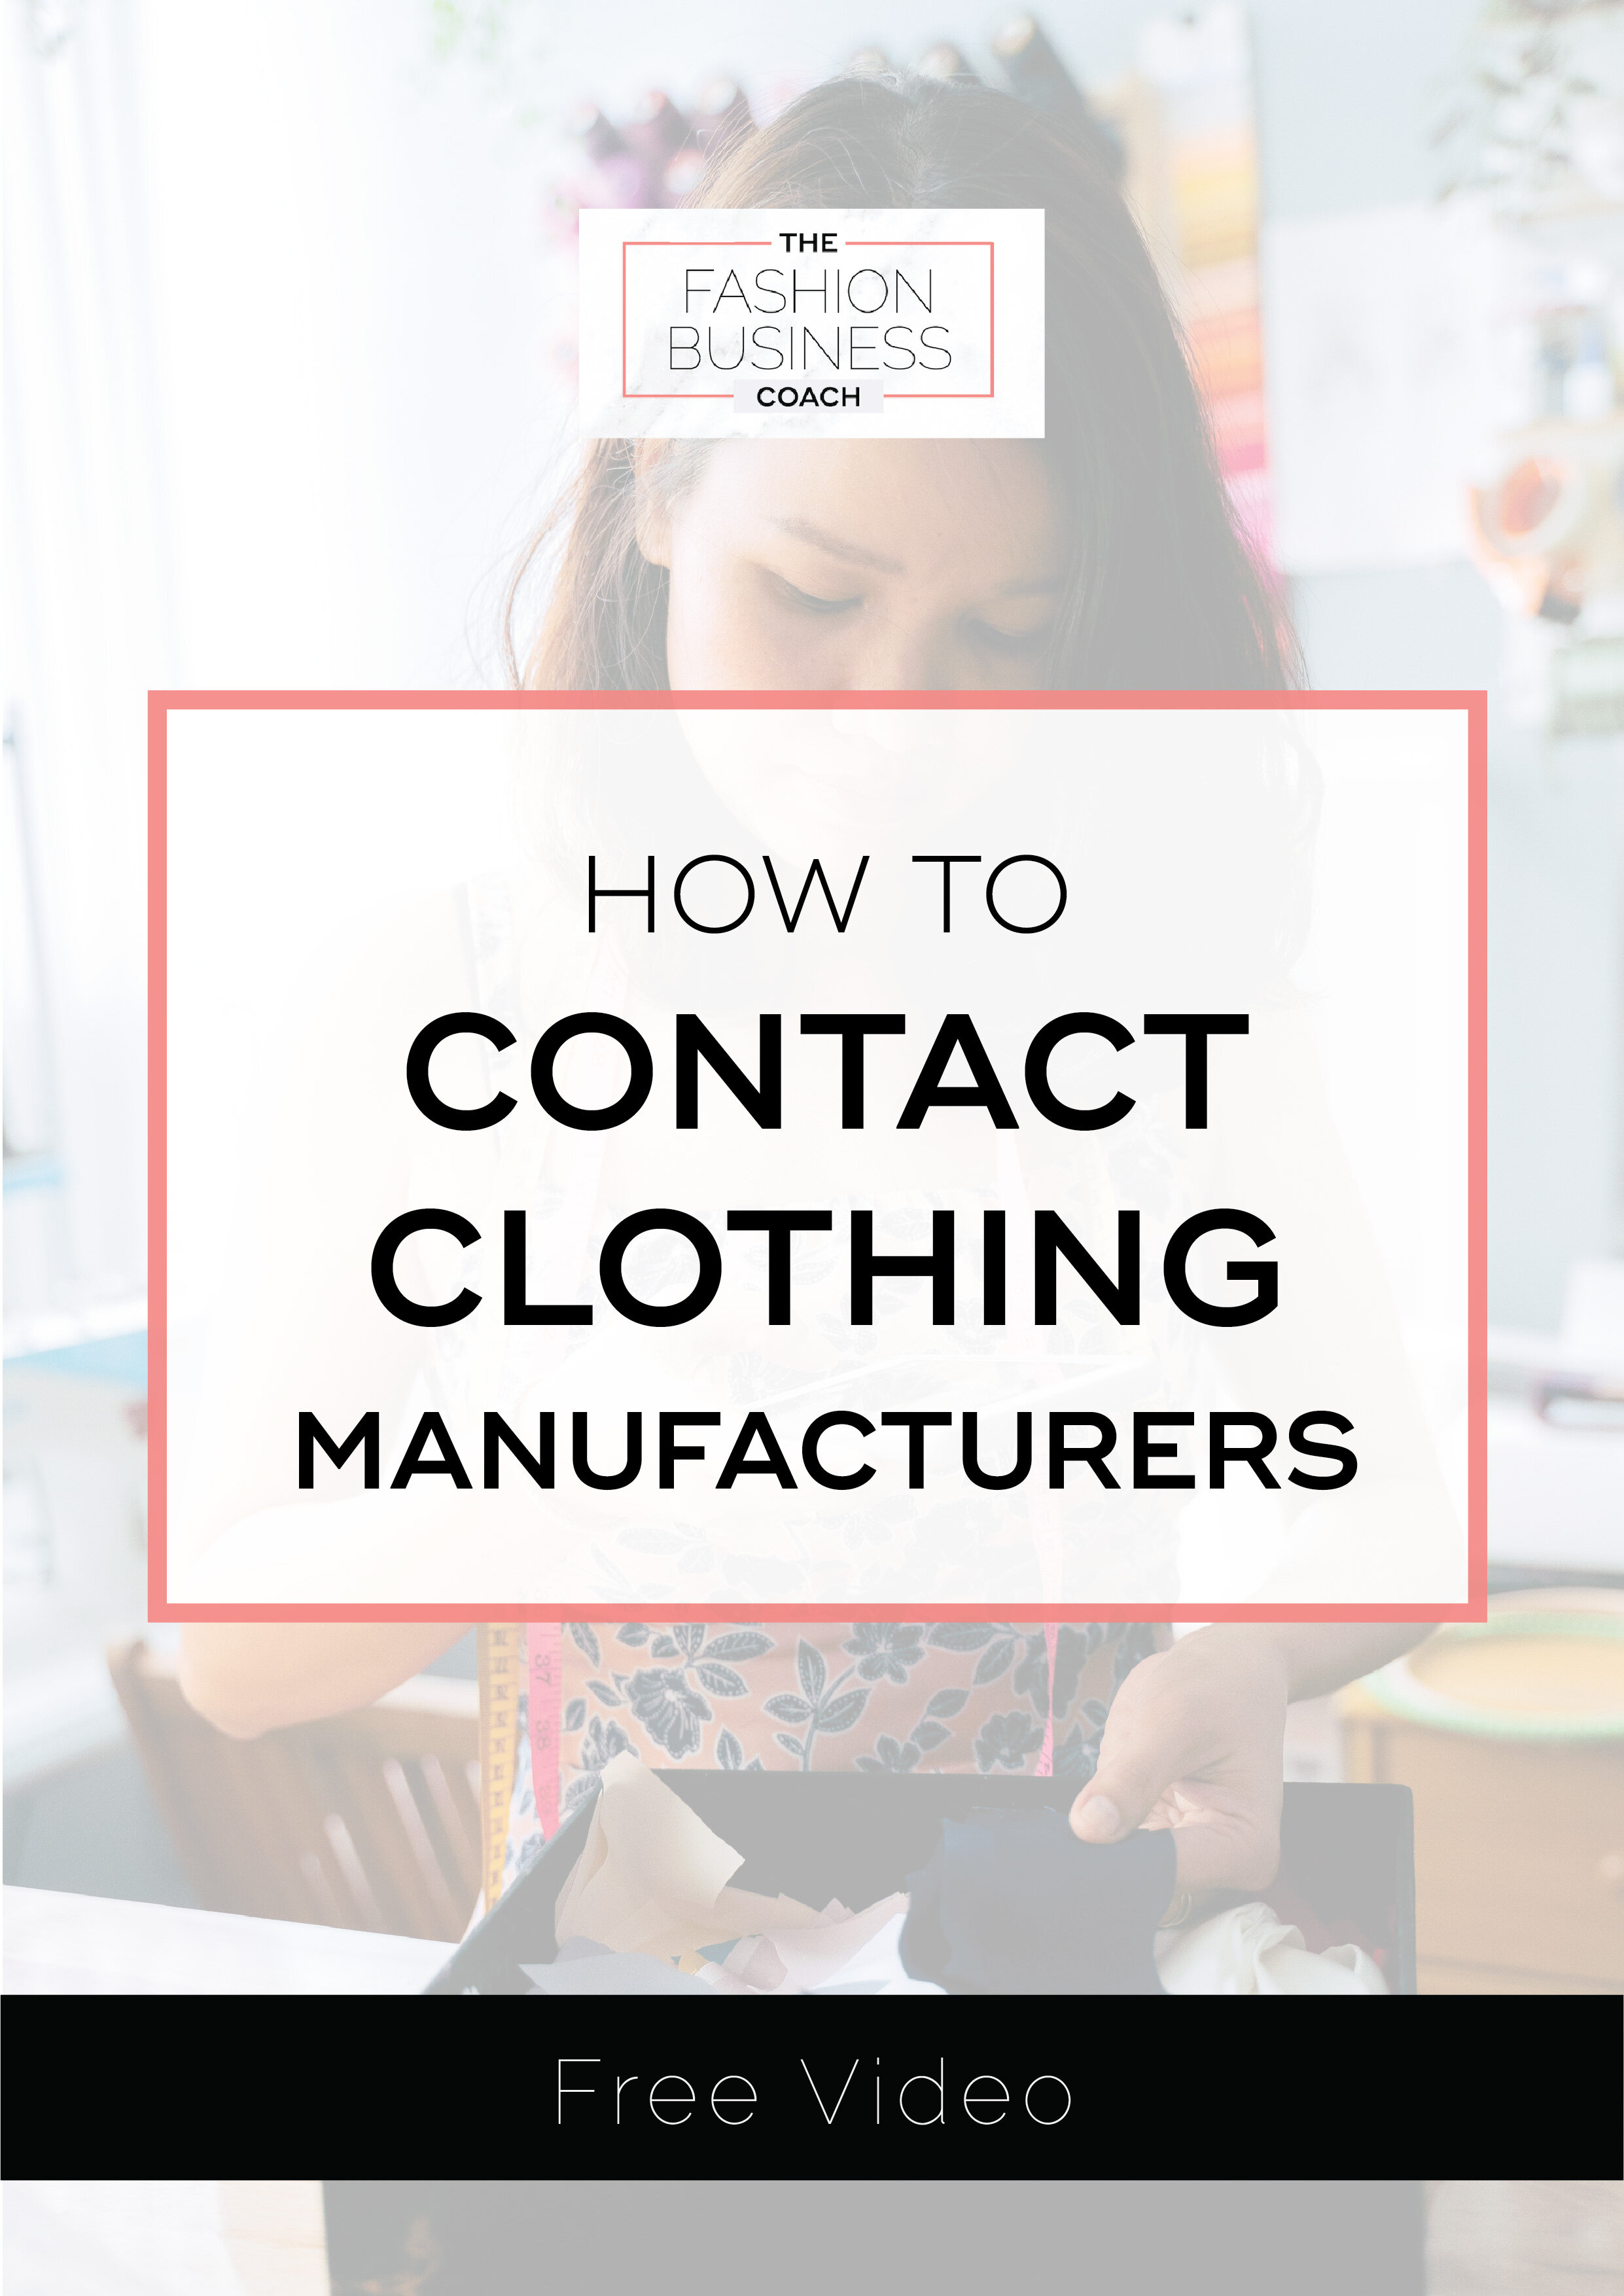 How to Contact Clothing Manufacturers Video.jpg